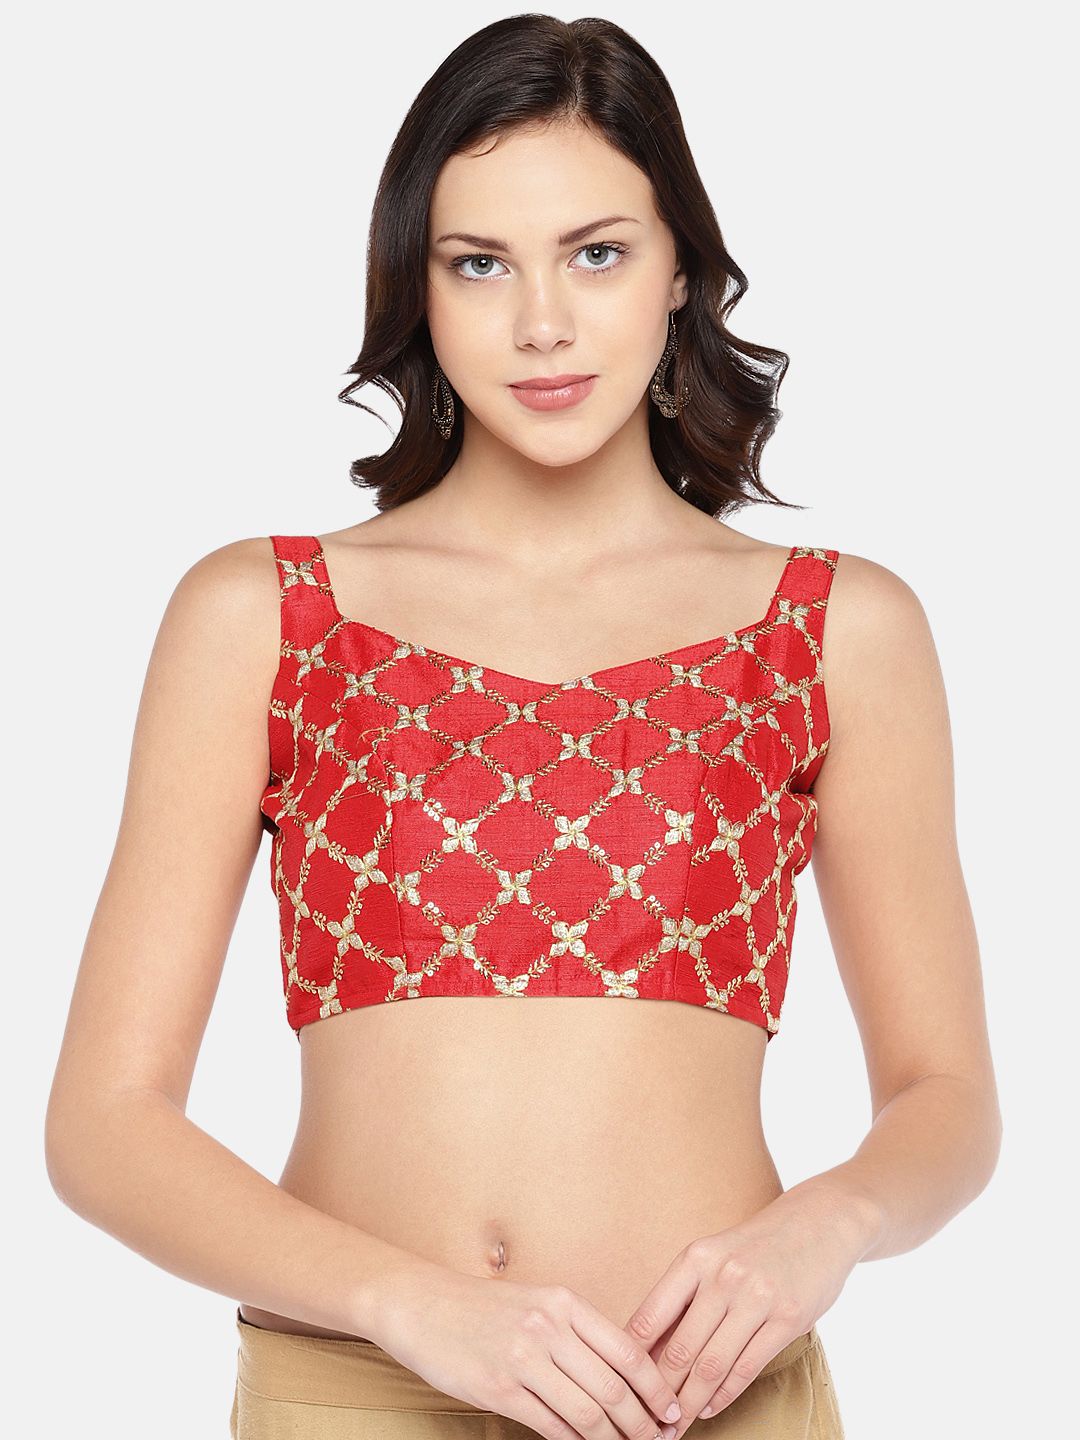 Studio Shringaar Women's Red Embroidered Sleeveless Saree Blouse Price in India